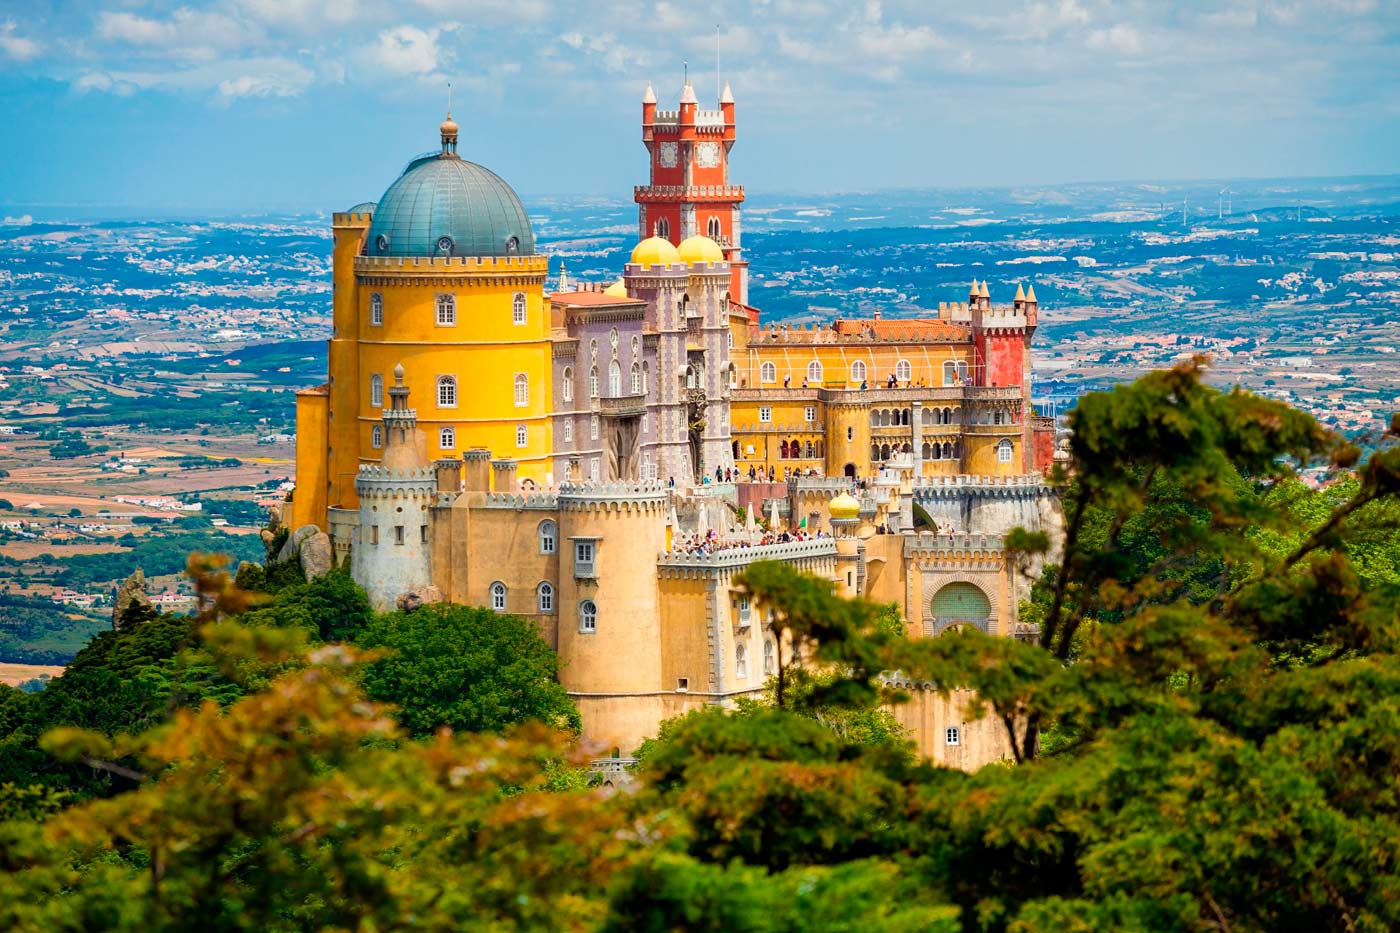 Pena Palace in Sintra - description of the building